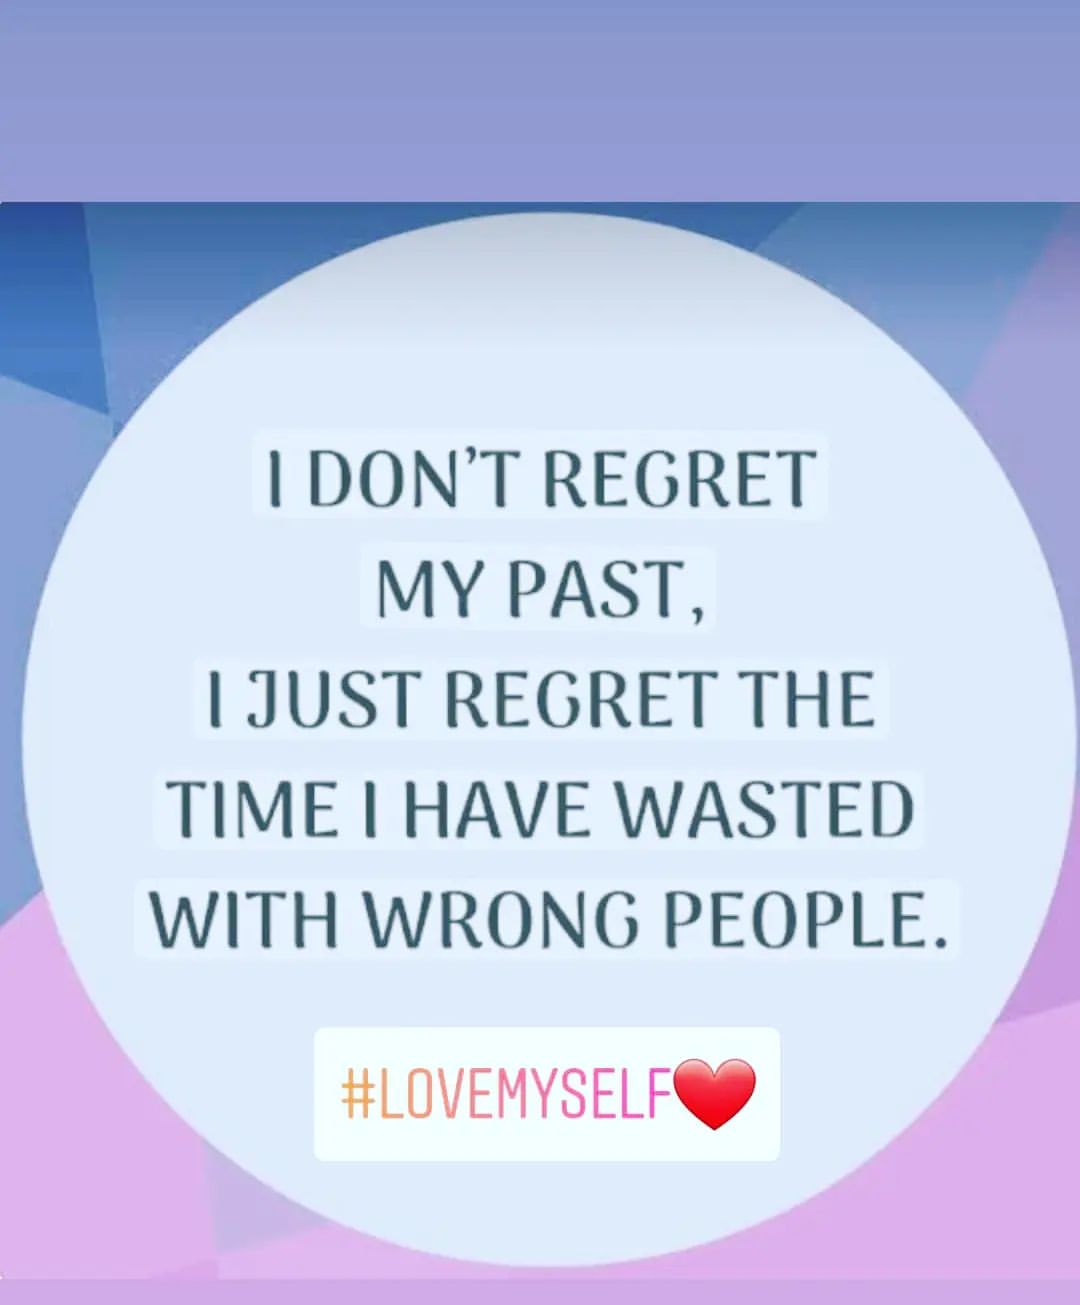 I don't regret my past, I just regret the time I have wasted with wrong people. #lovemyself.